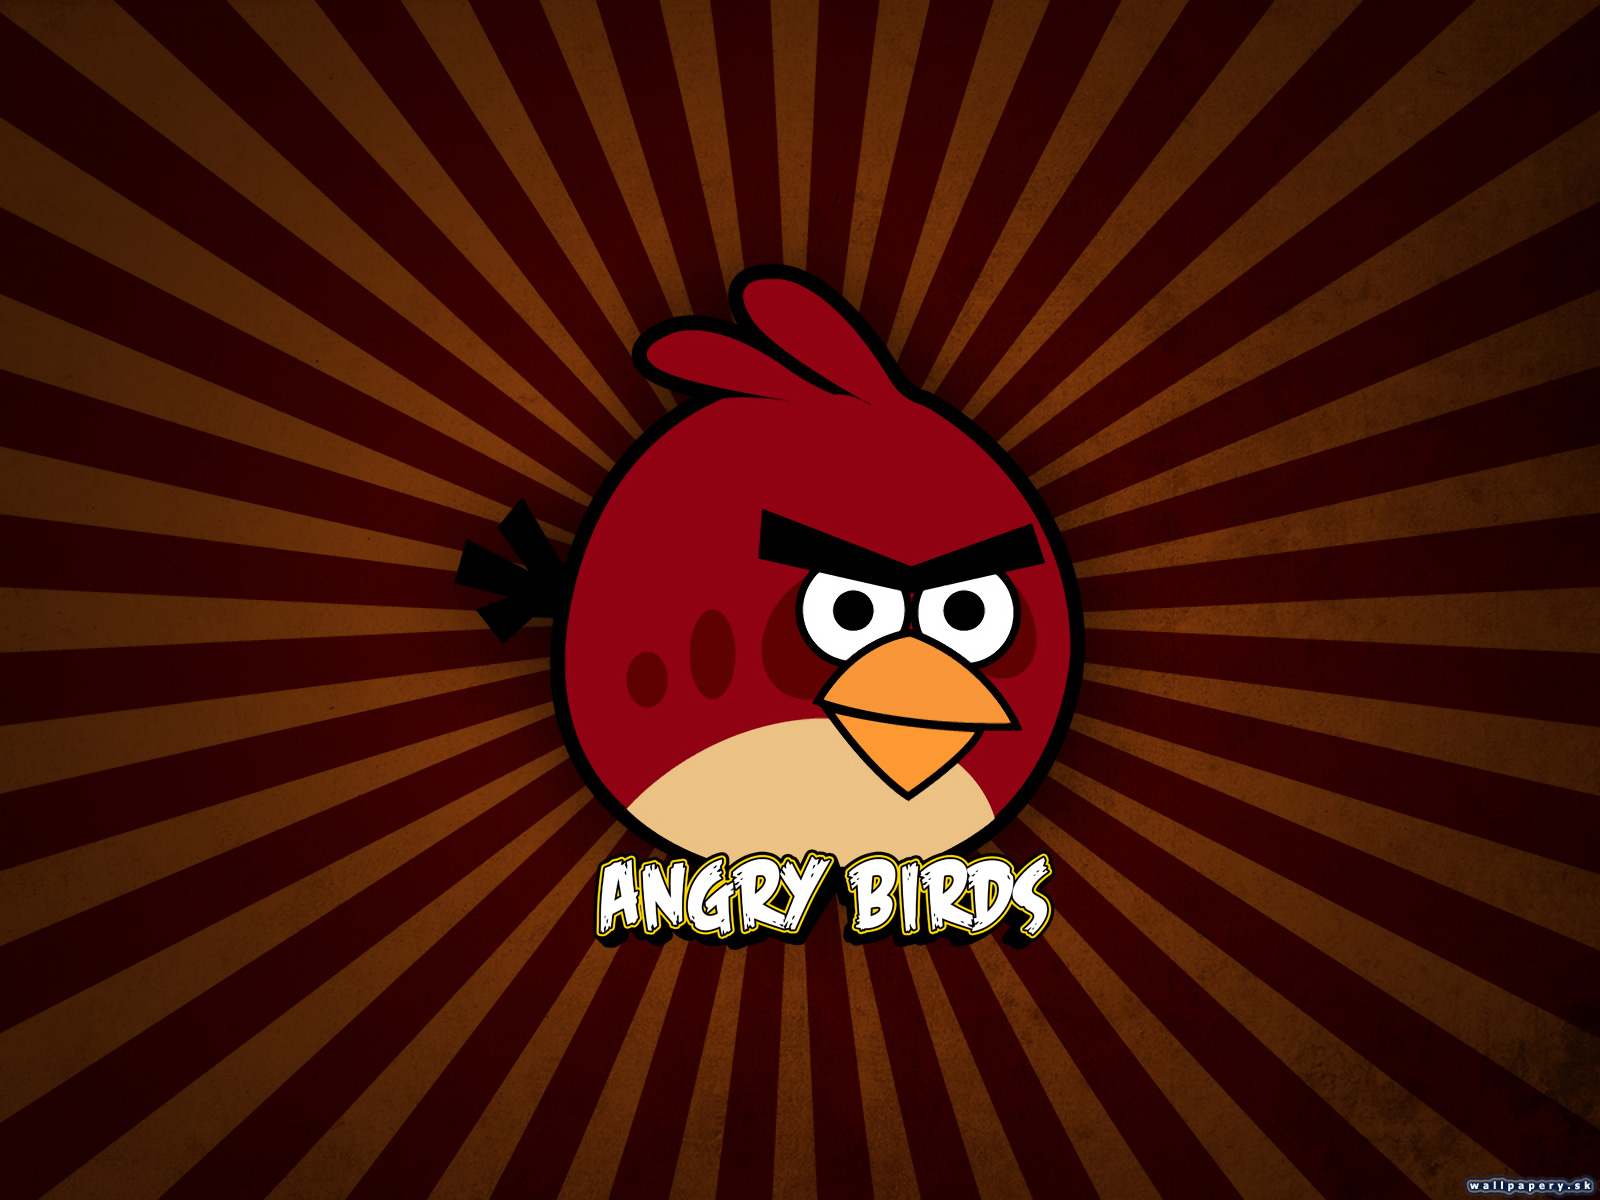 Angry Birds - wallpaper 7